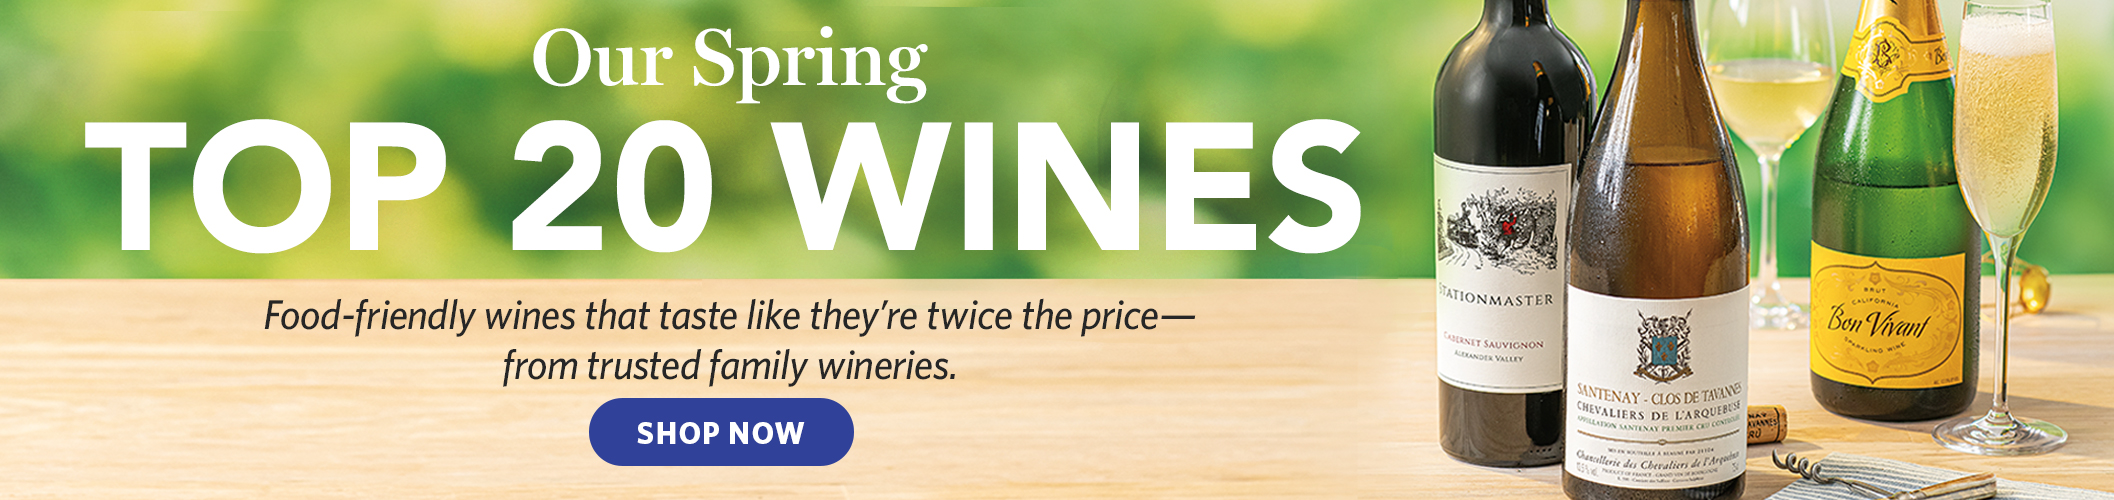 Our Spring Top 20 Wines - Shop Now